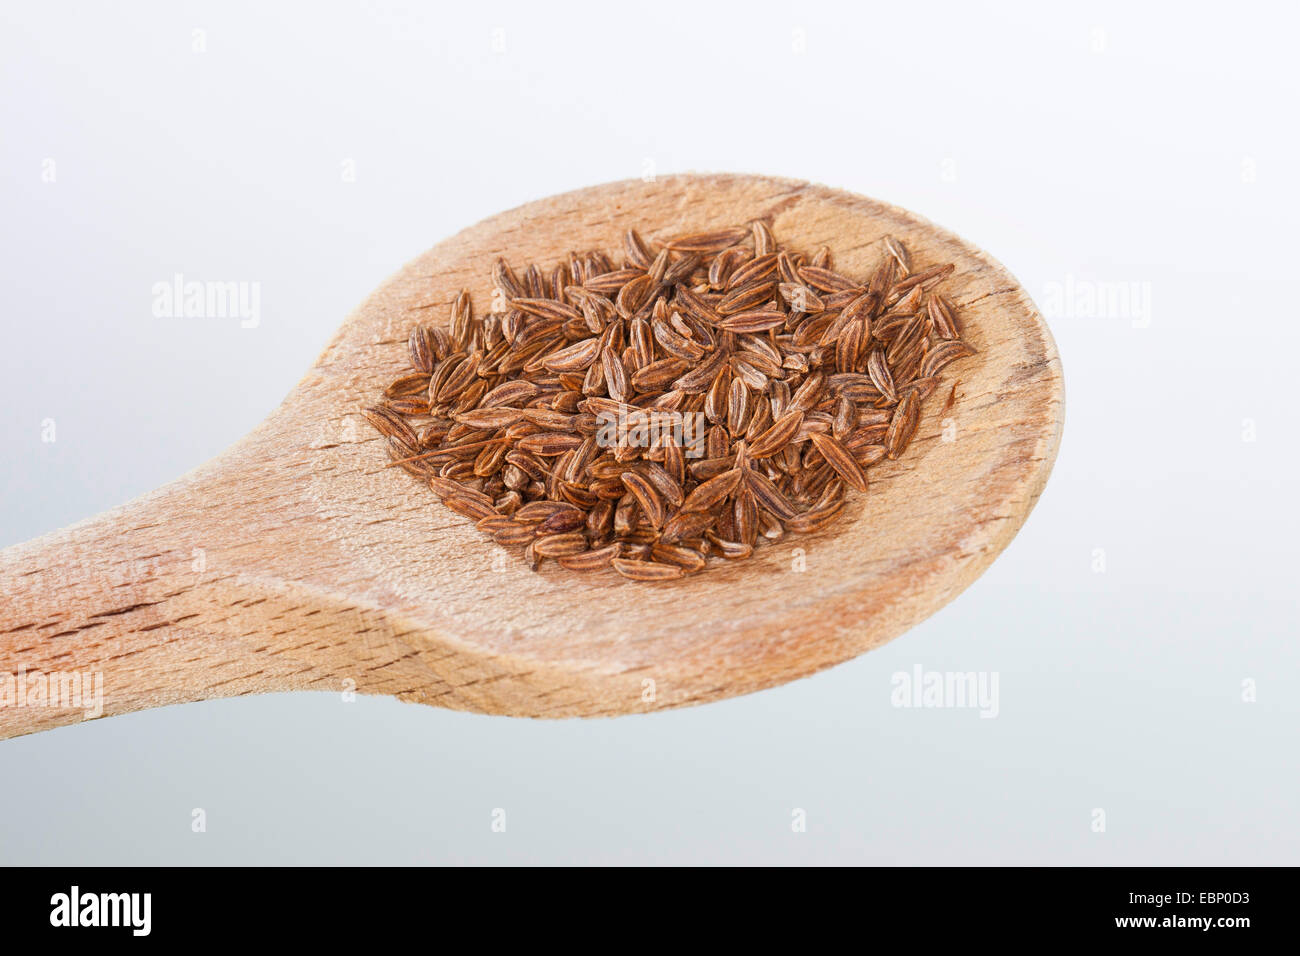 common caraway (Carum carvi), kernels on a wooden spoon Stock Photo